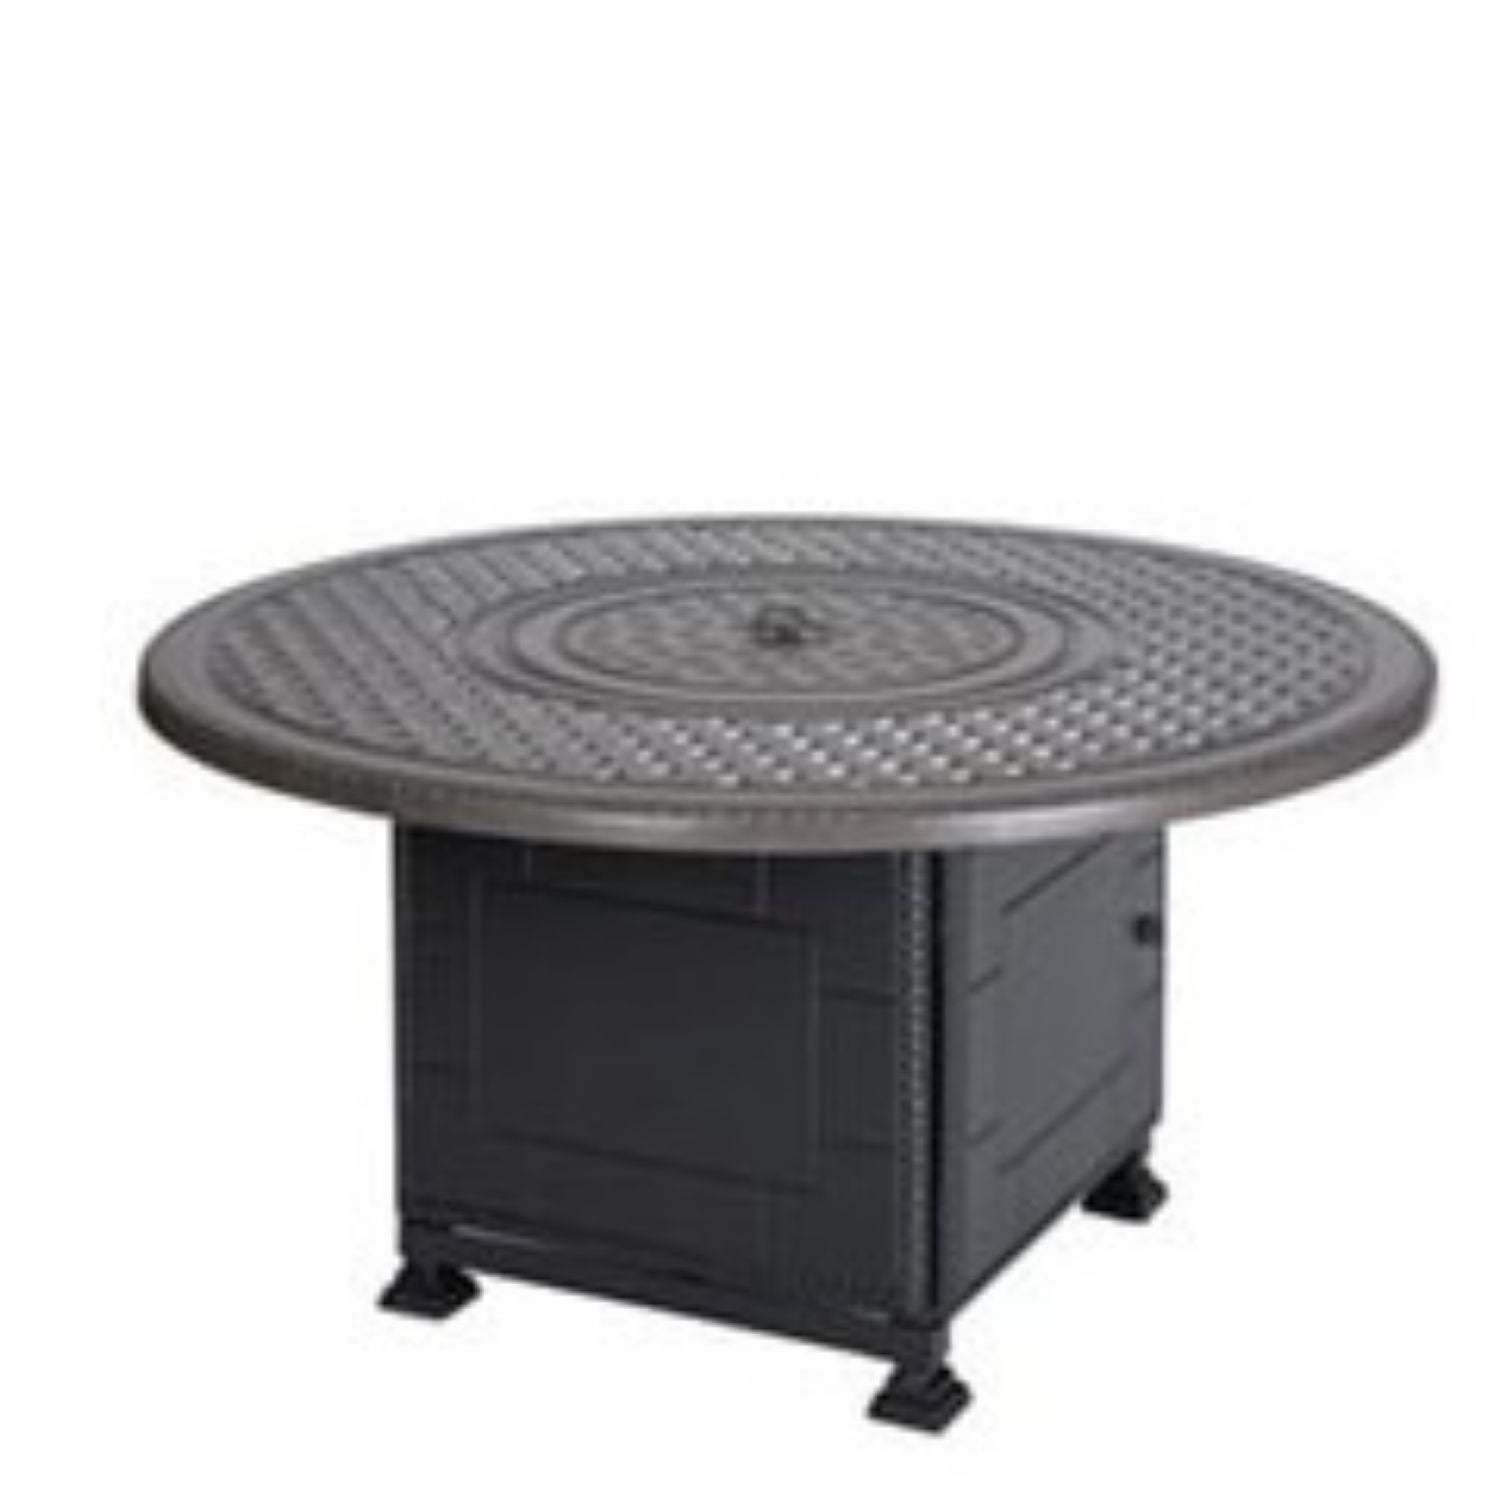 Grand Terrace 54" Round Fire Table